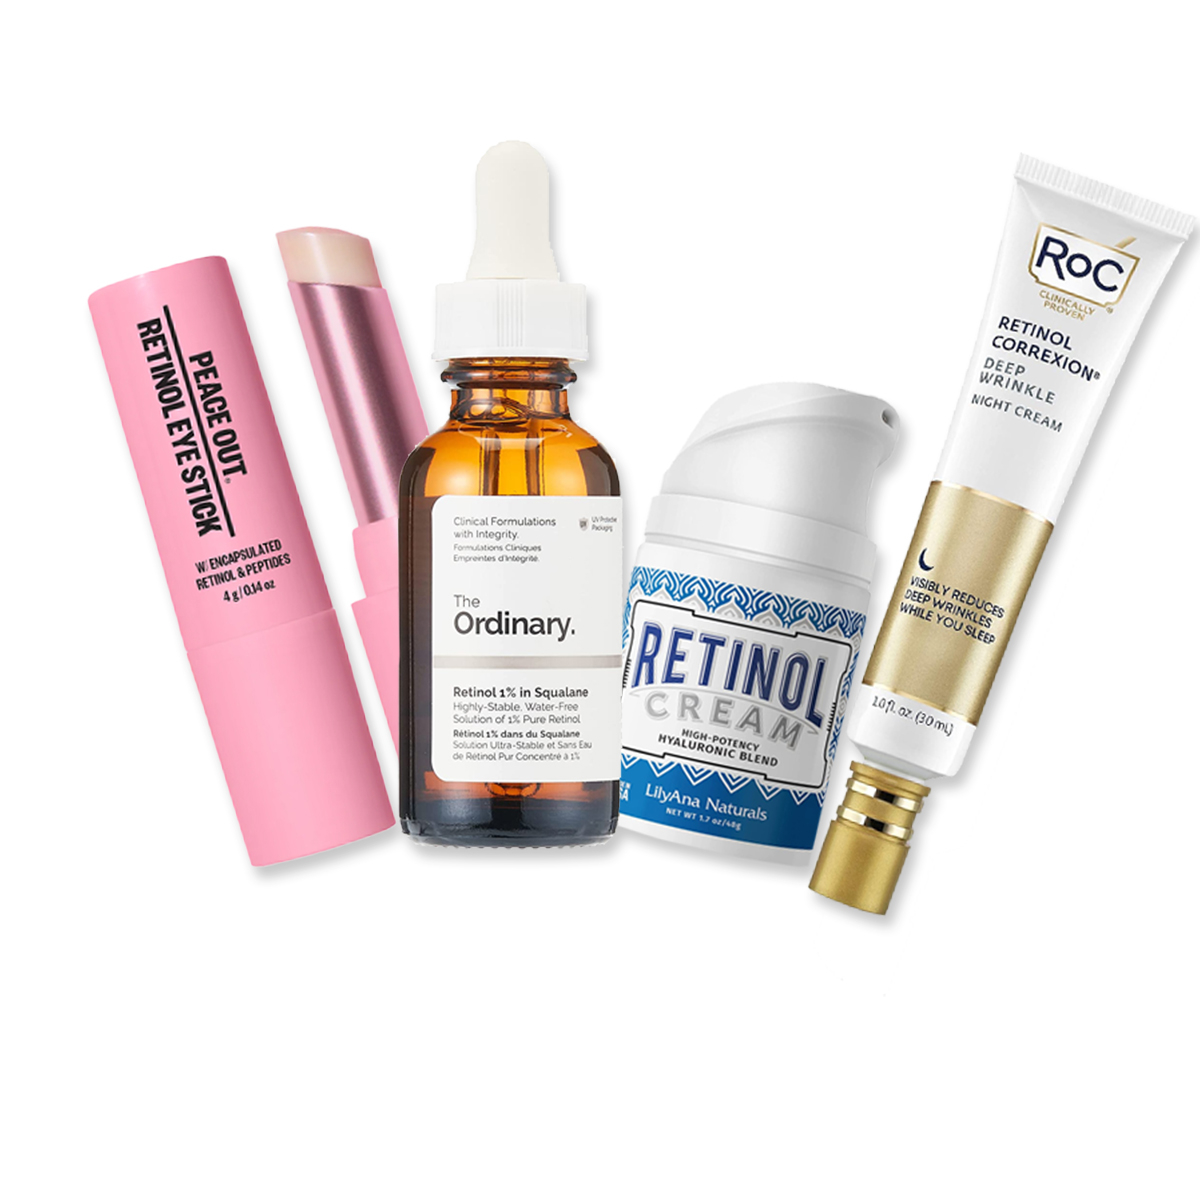 Under $50 Retinol Creams & Serums That Reviewers Swear By - E! Online